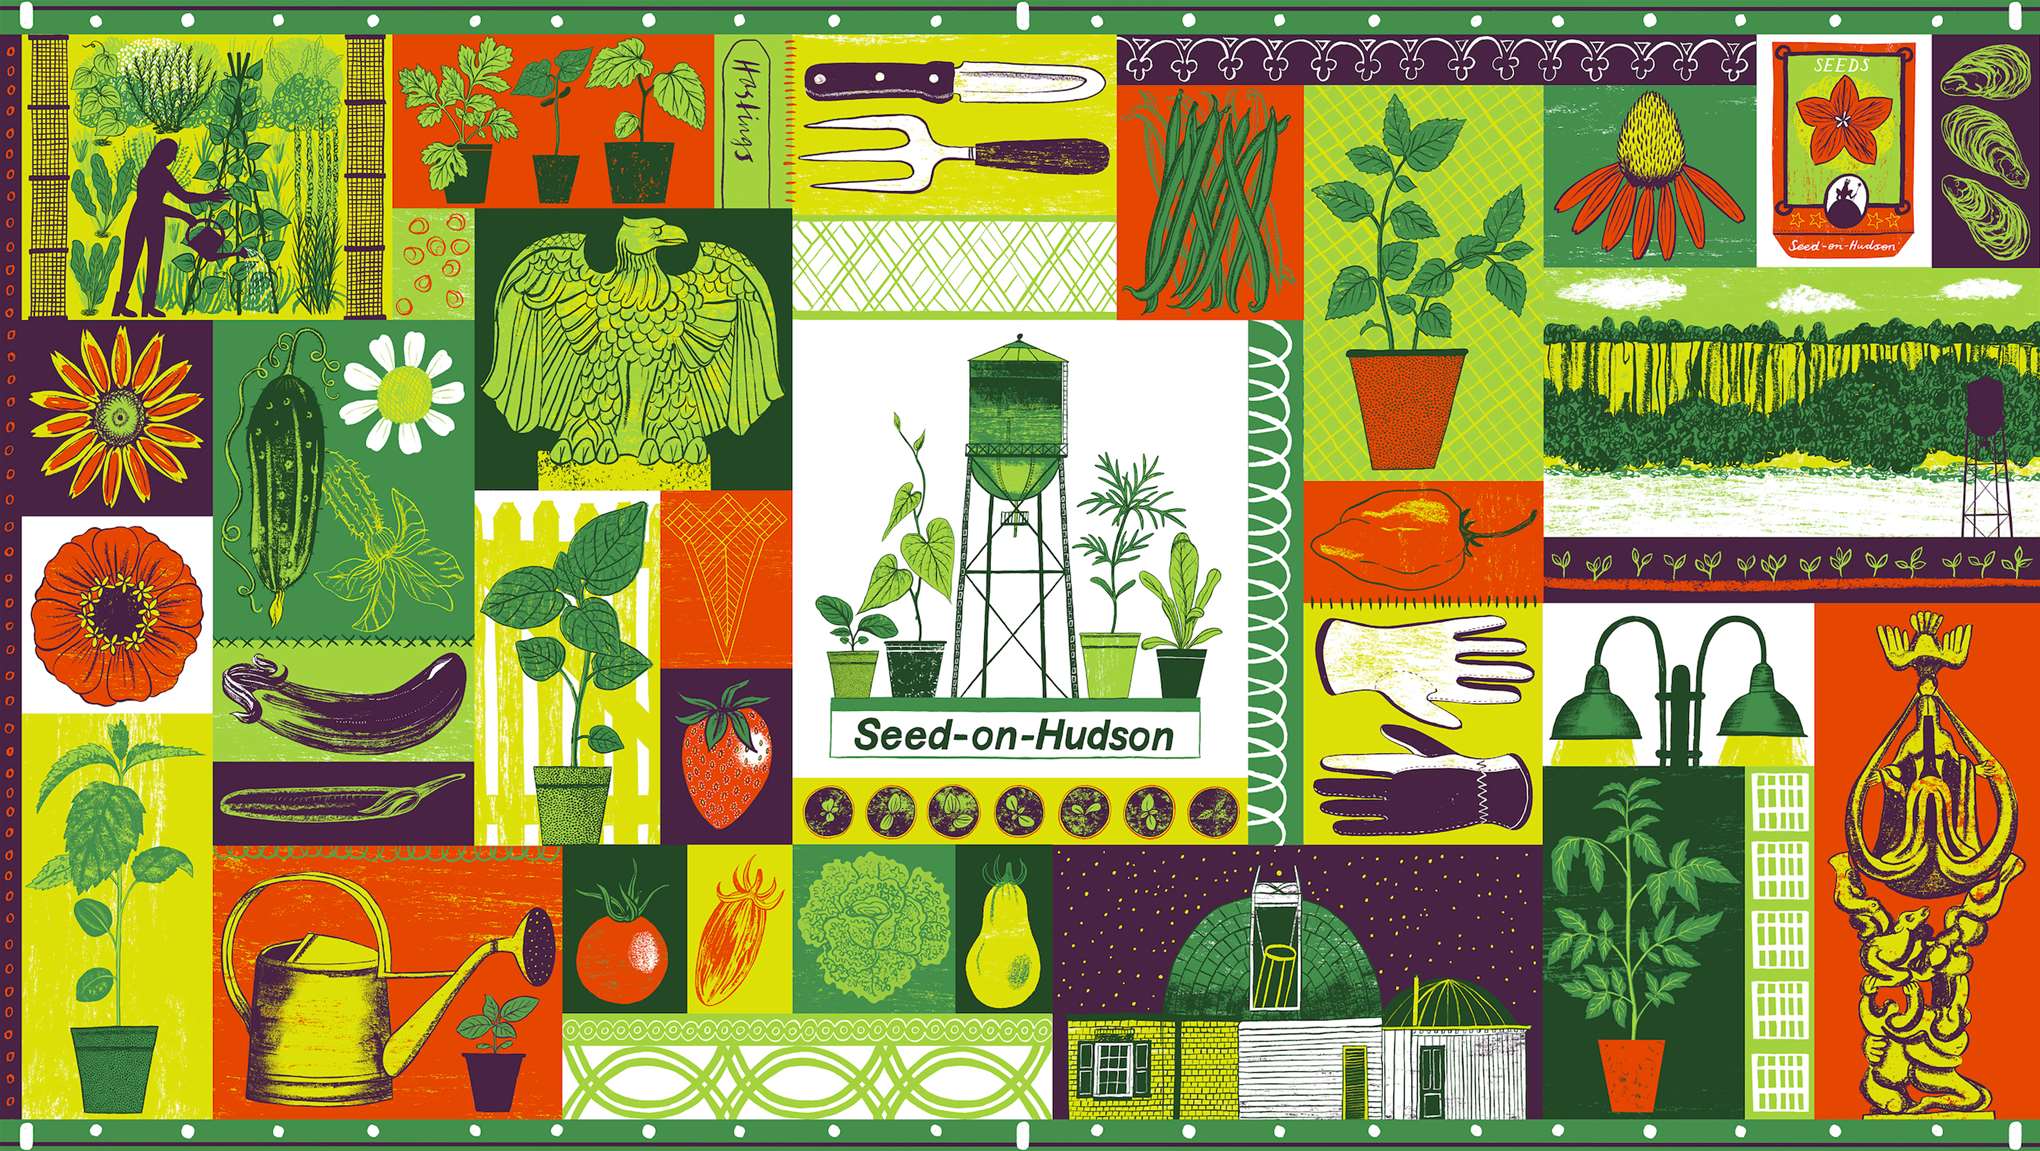 Alice Pattullo, Illustration and logo produced for NY based nursery and flower farm, Seed-On-Hudson including plant varieties Katie grows as well as local landmarks in Hasting-on-Hudson where she is based.